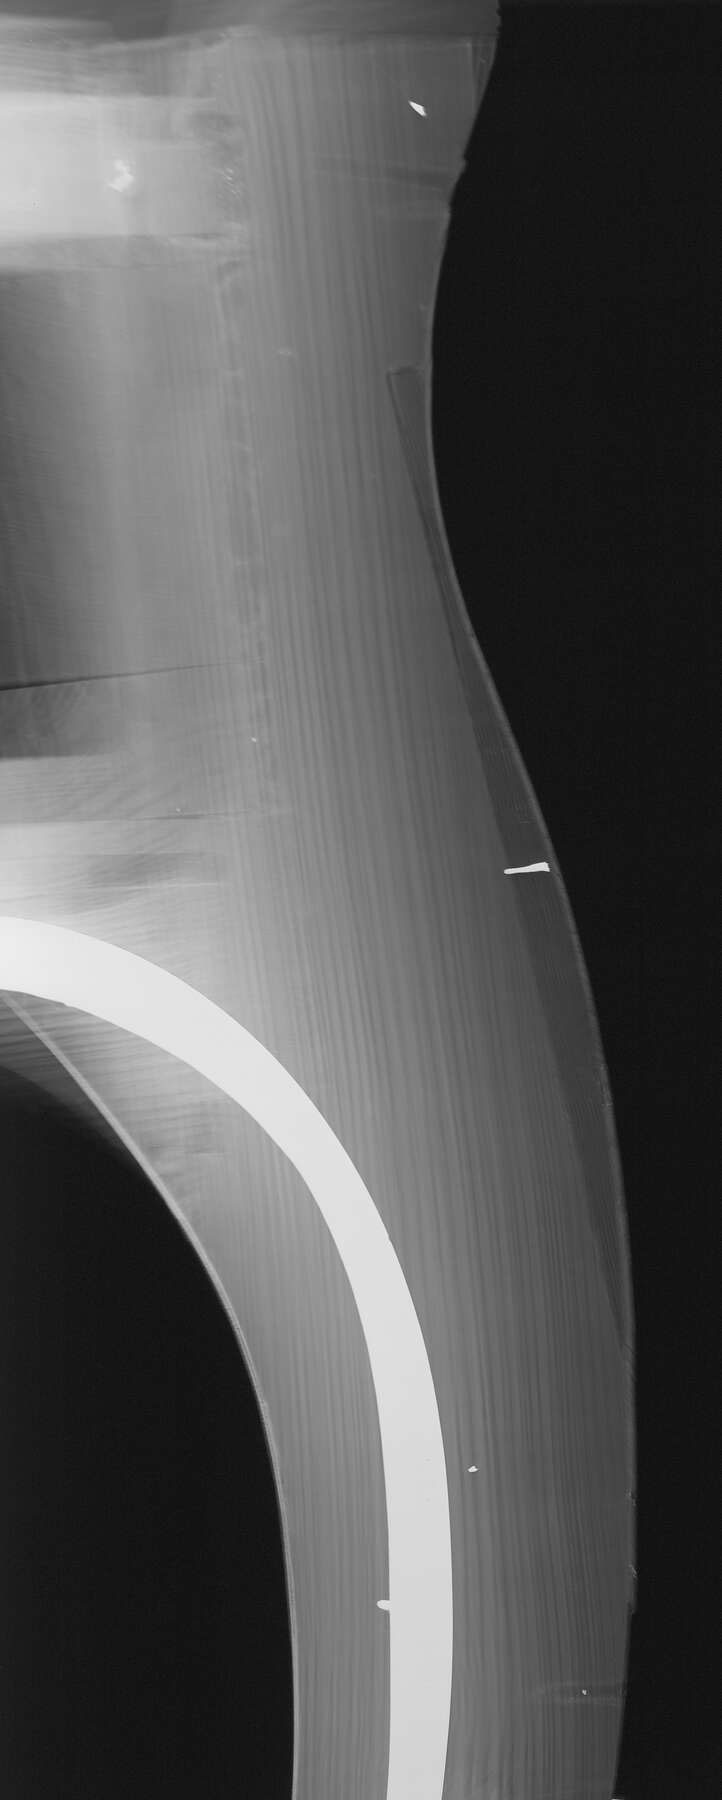 black and white x-ray of one of the desk legs, showing the wood in shades of gray with a white curved line running down the leg